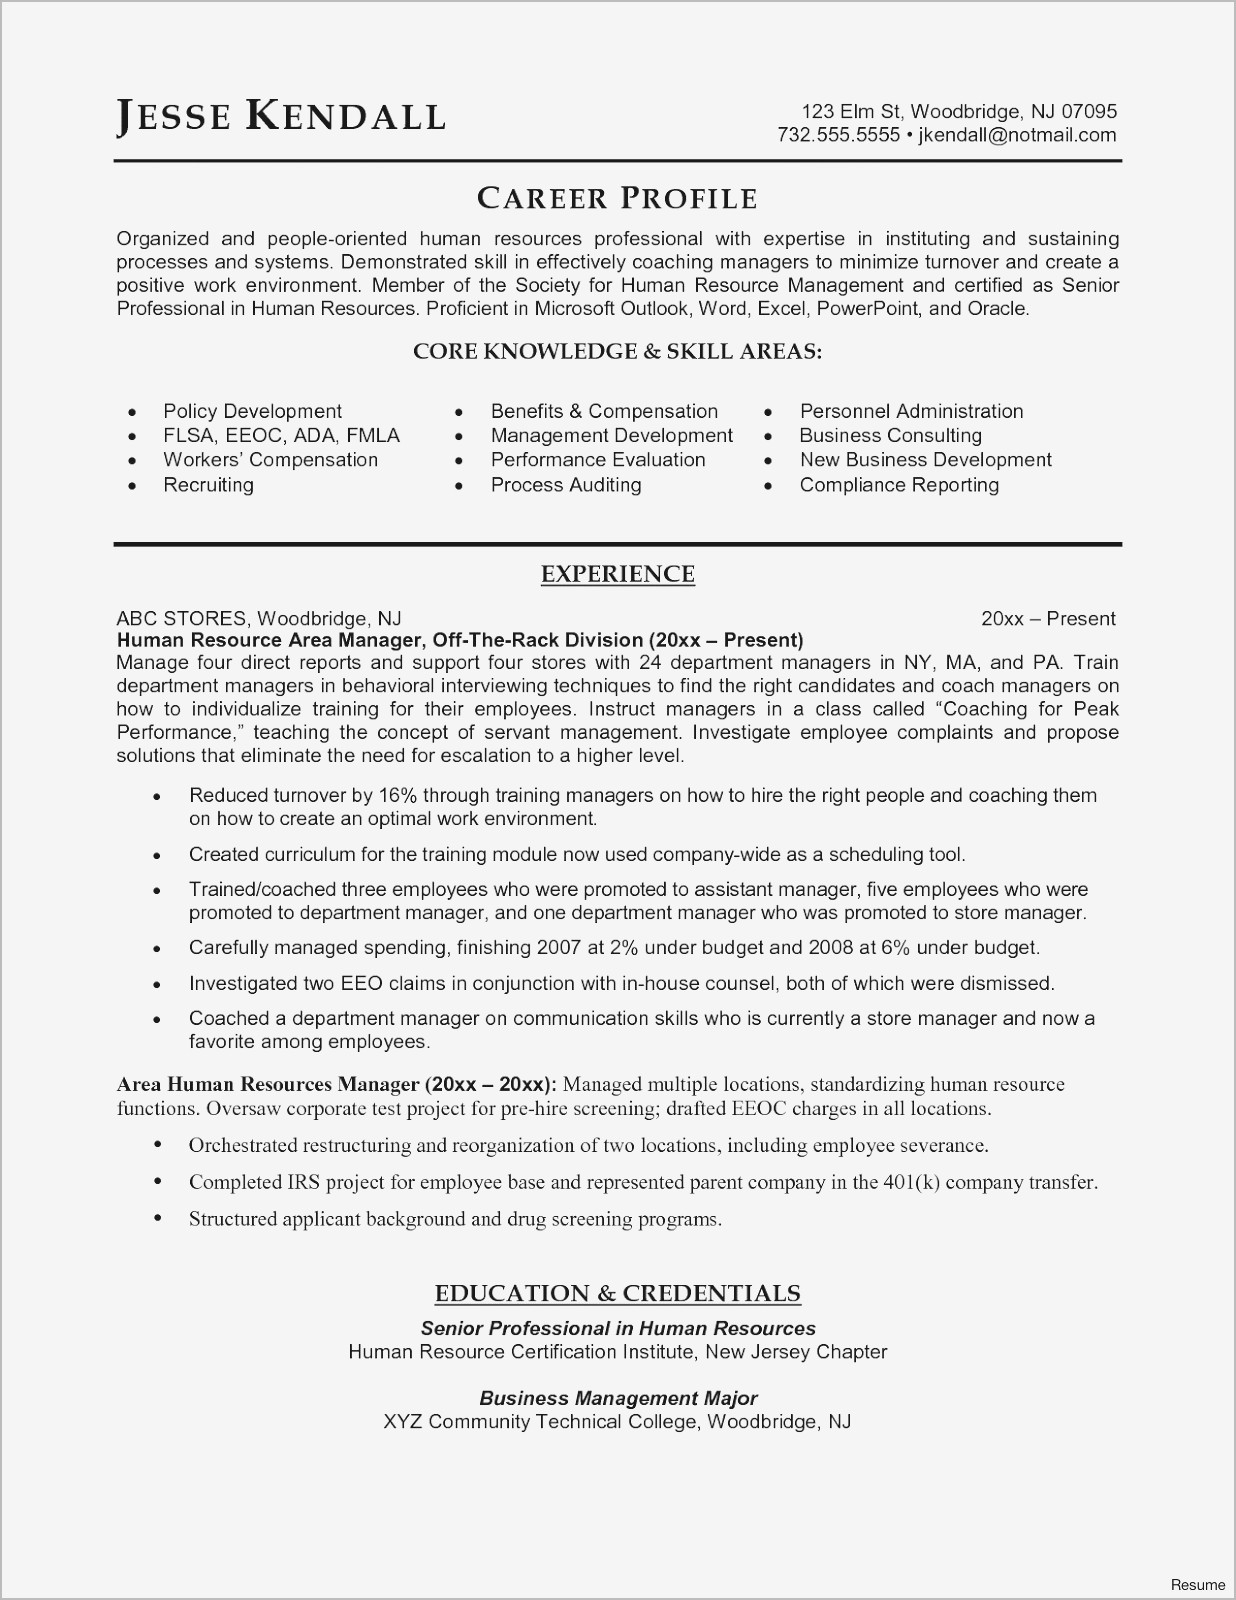 Hiring Letter Template - Letter to the Irs Template